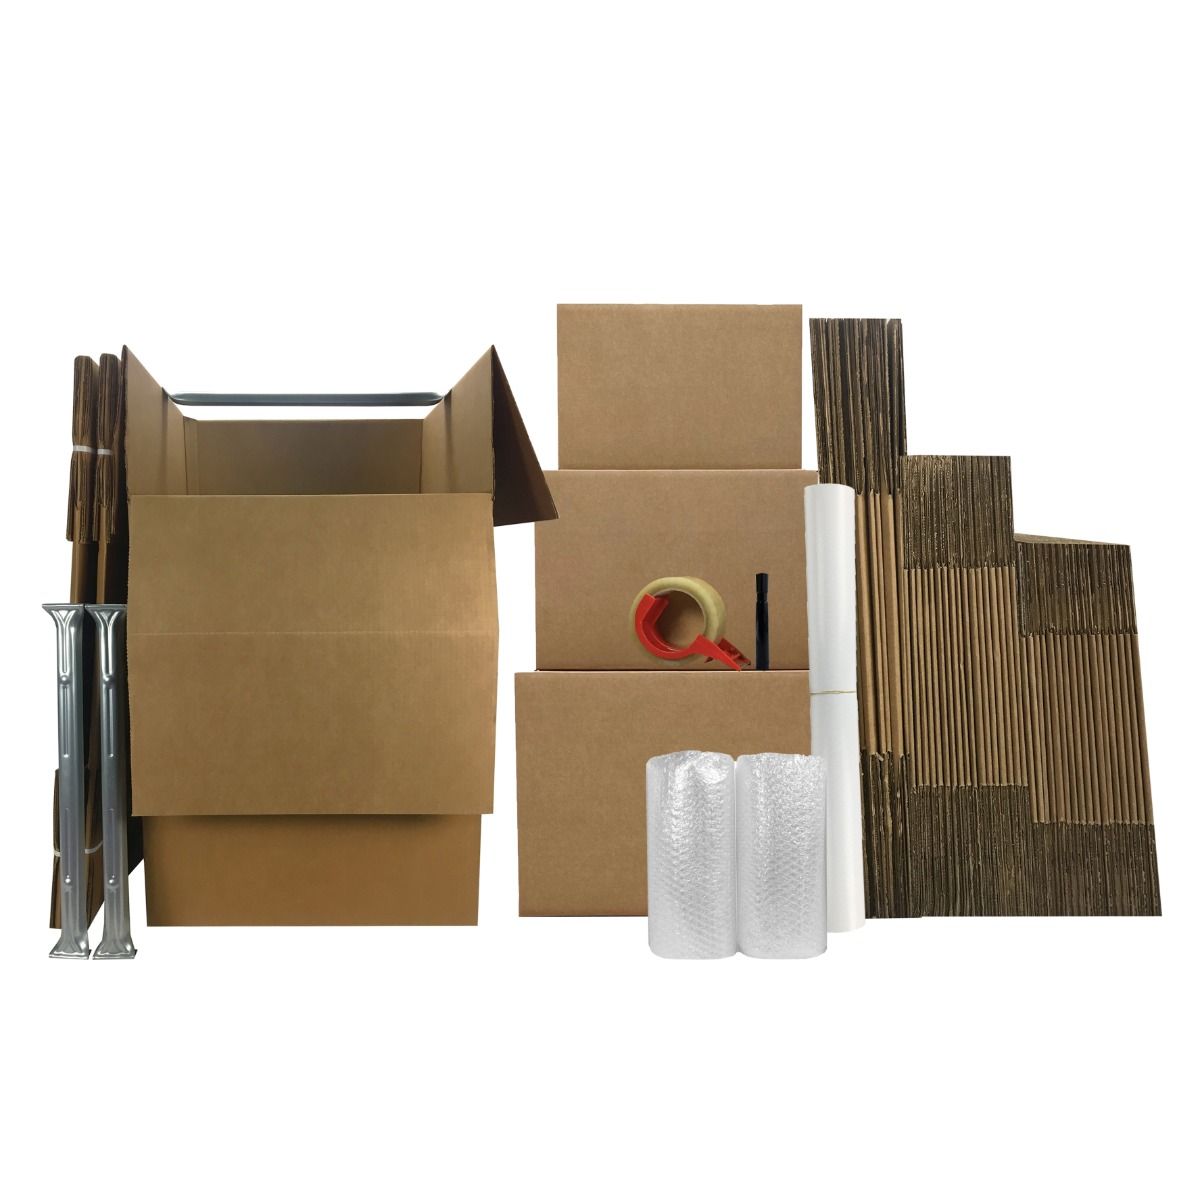 Uboxes Medium Cardboard Moving Boxes (20 Pack) 18 x 14 x12 -Inch